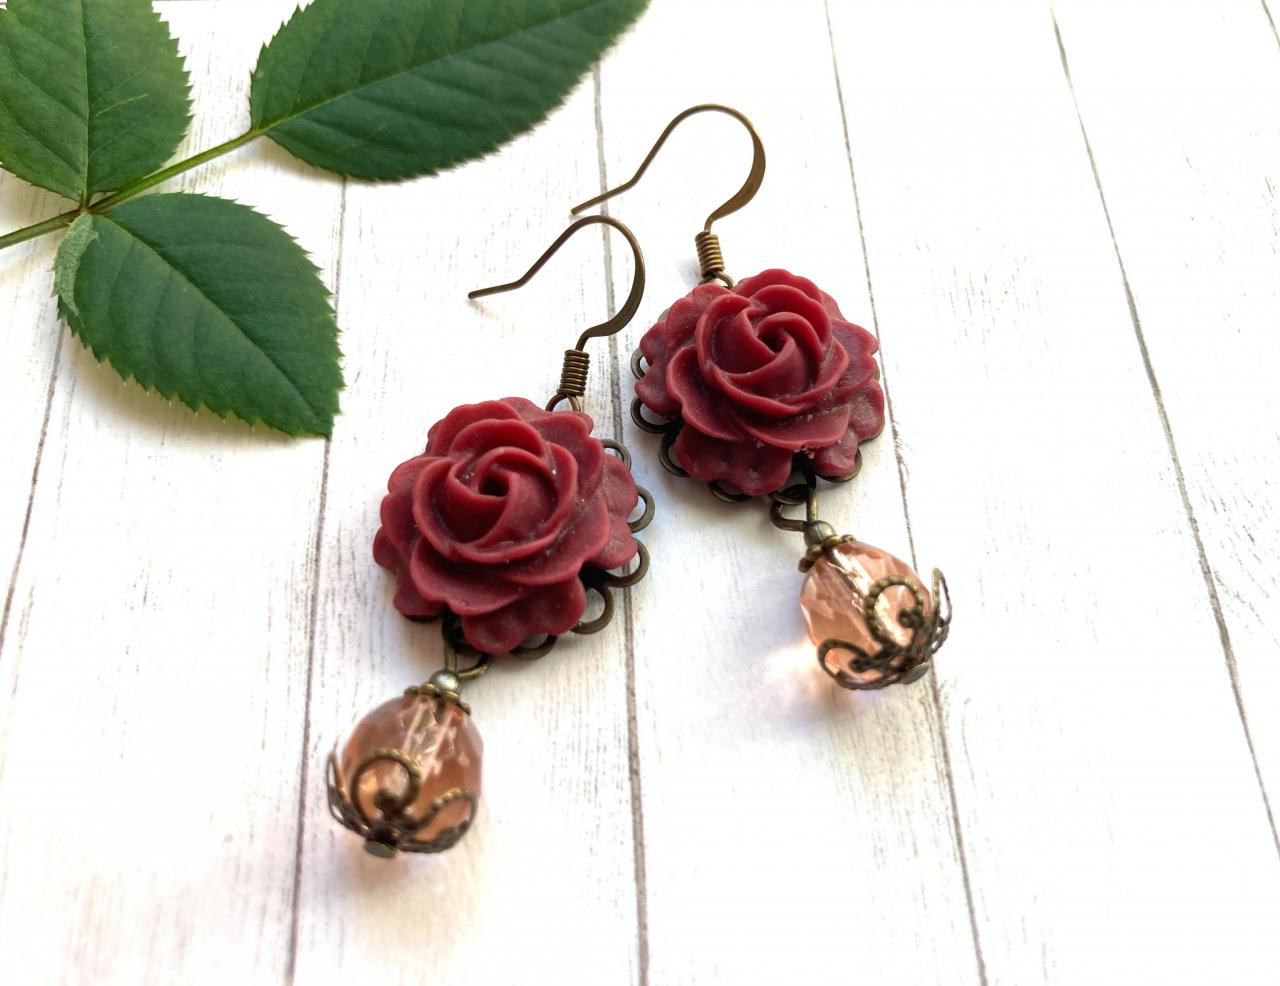 Beautiful Earrings With Dark Red Rose Pendants And Glass Beads, Selma Dreams